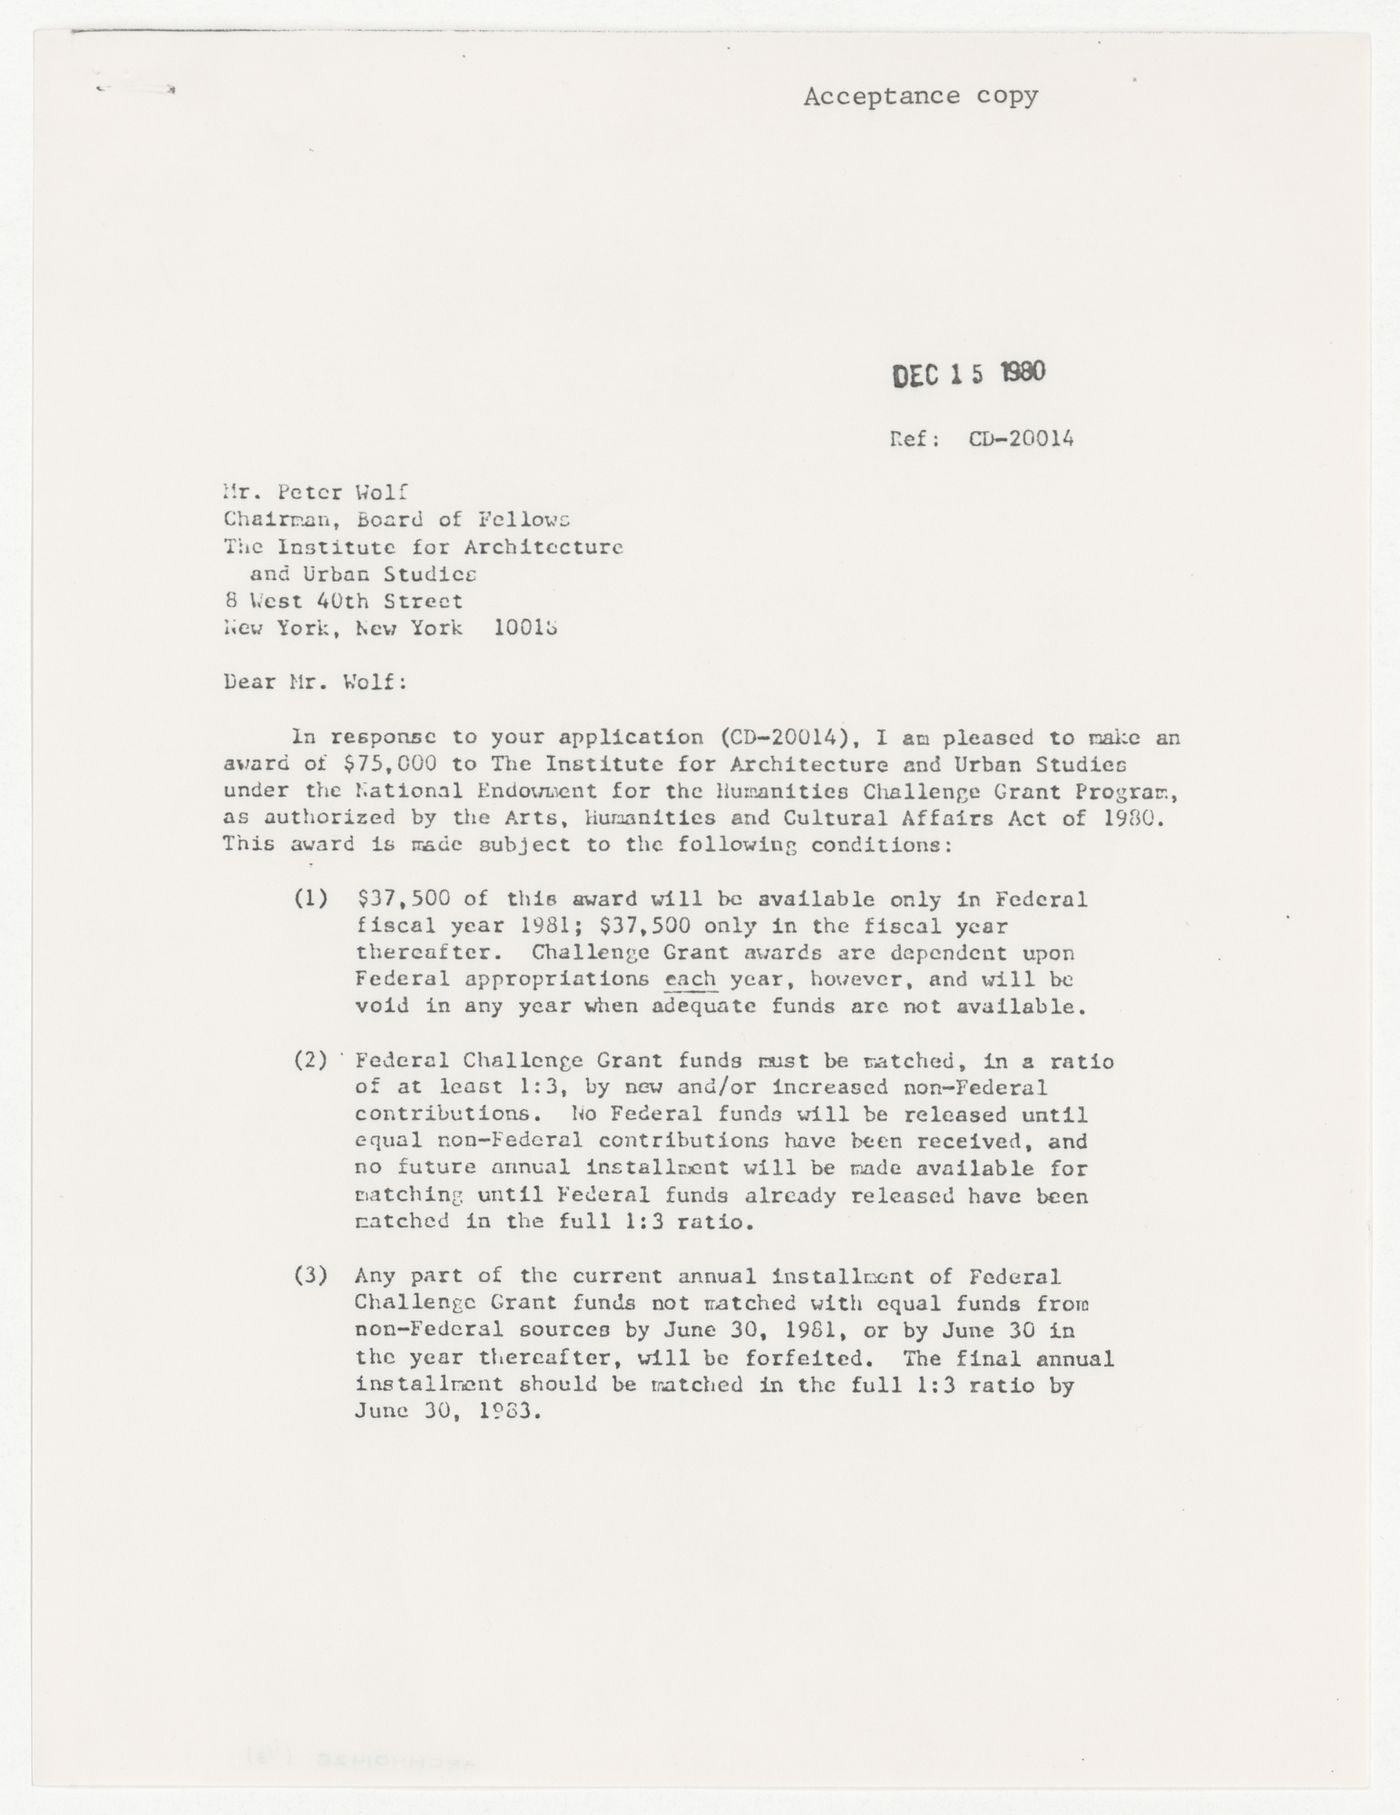 Letter from Joseph Duffey to Peter Wolf about IAUS receiving National Endowment for the Humanities (NEH) Challenge Grant